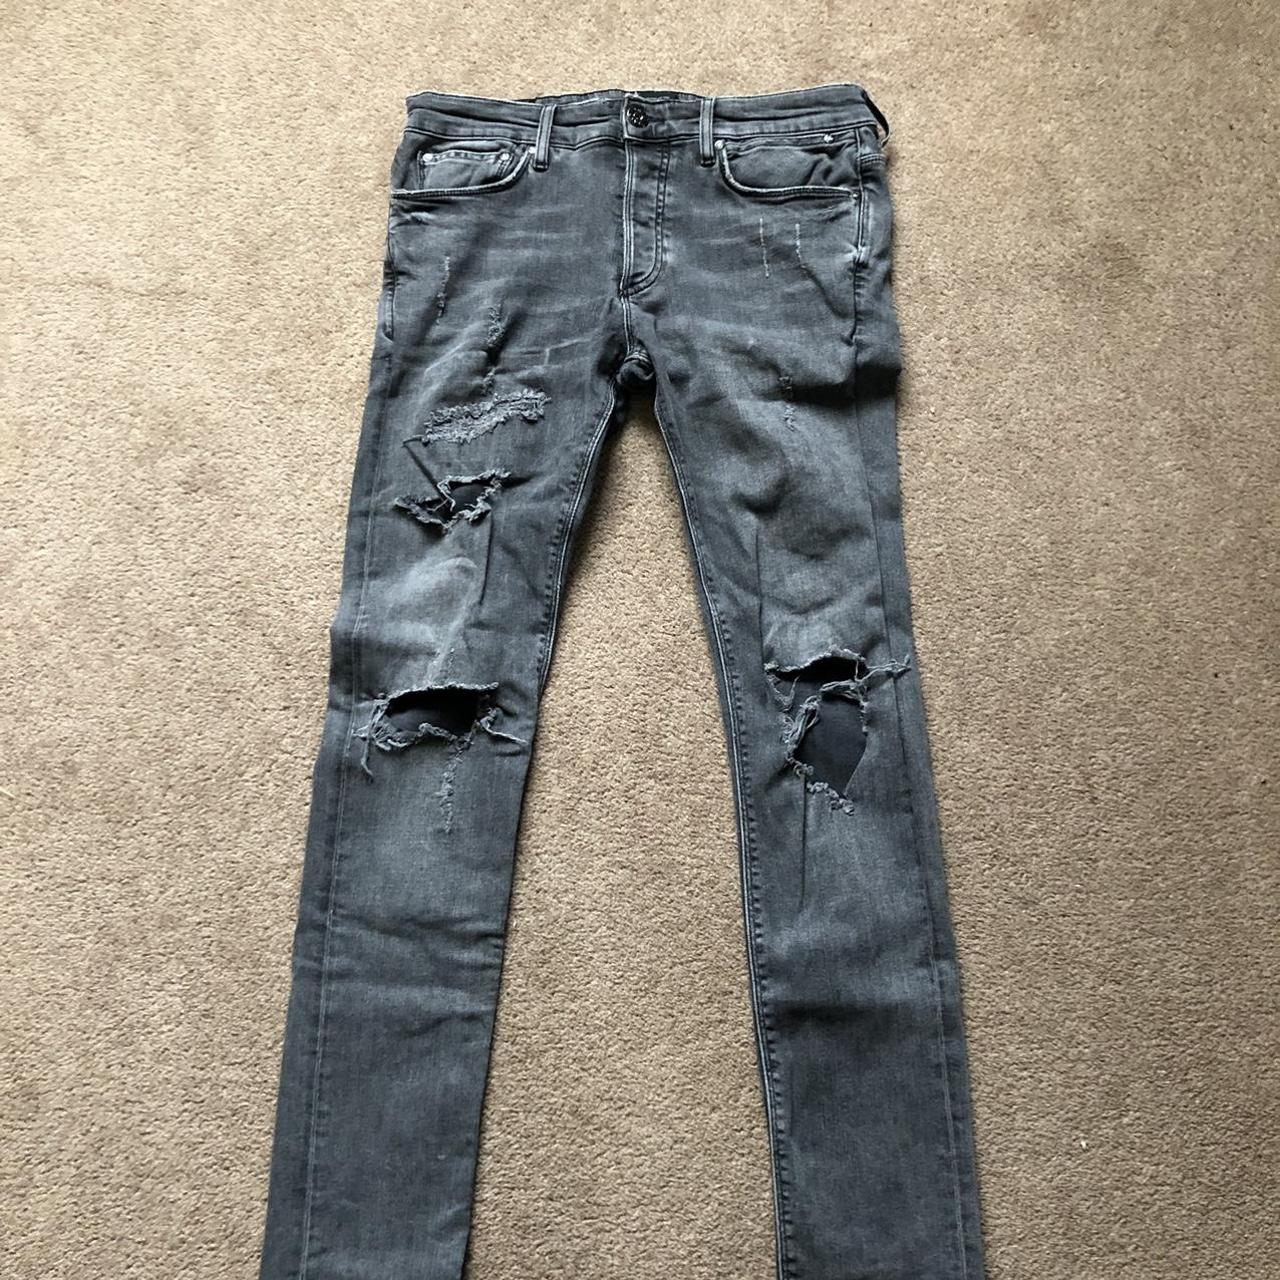 River Island Ripped Jeans - Worn 5-10 times - Super... - Depop